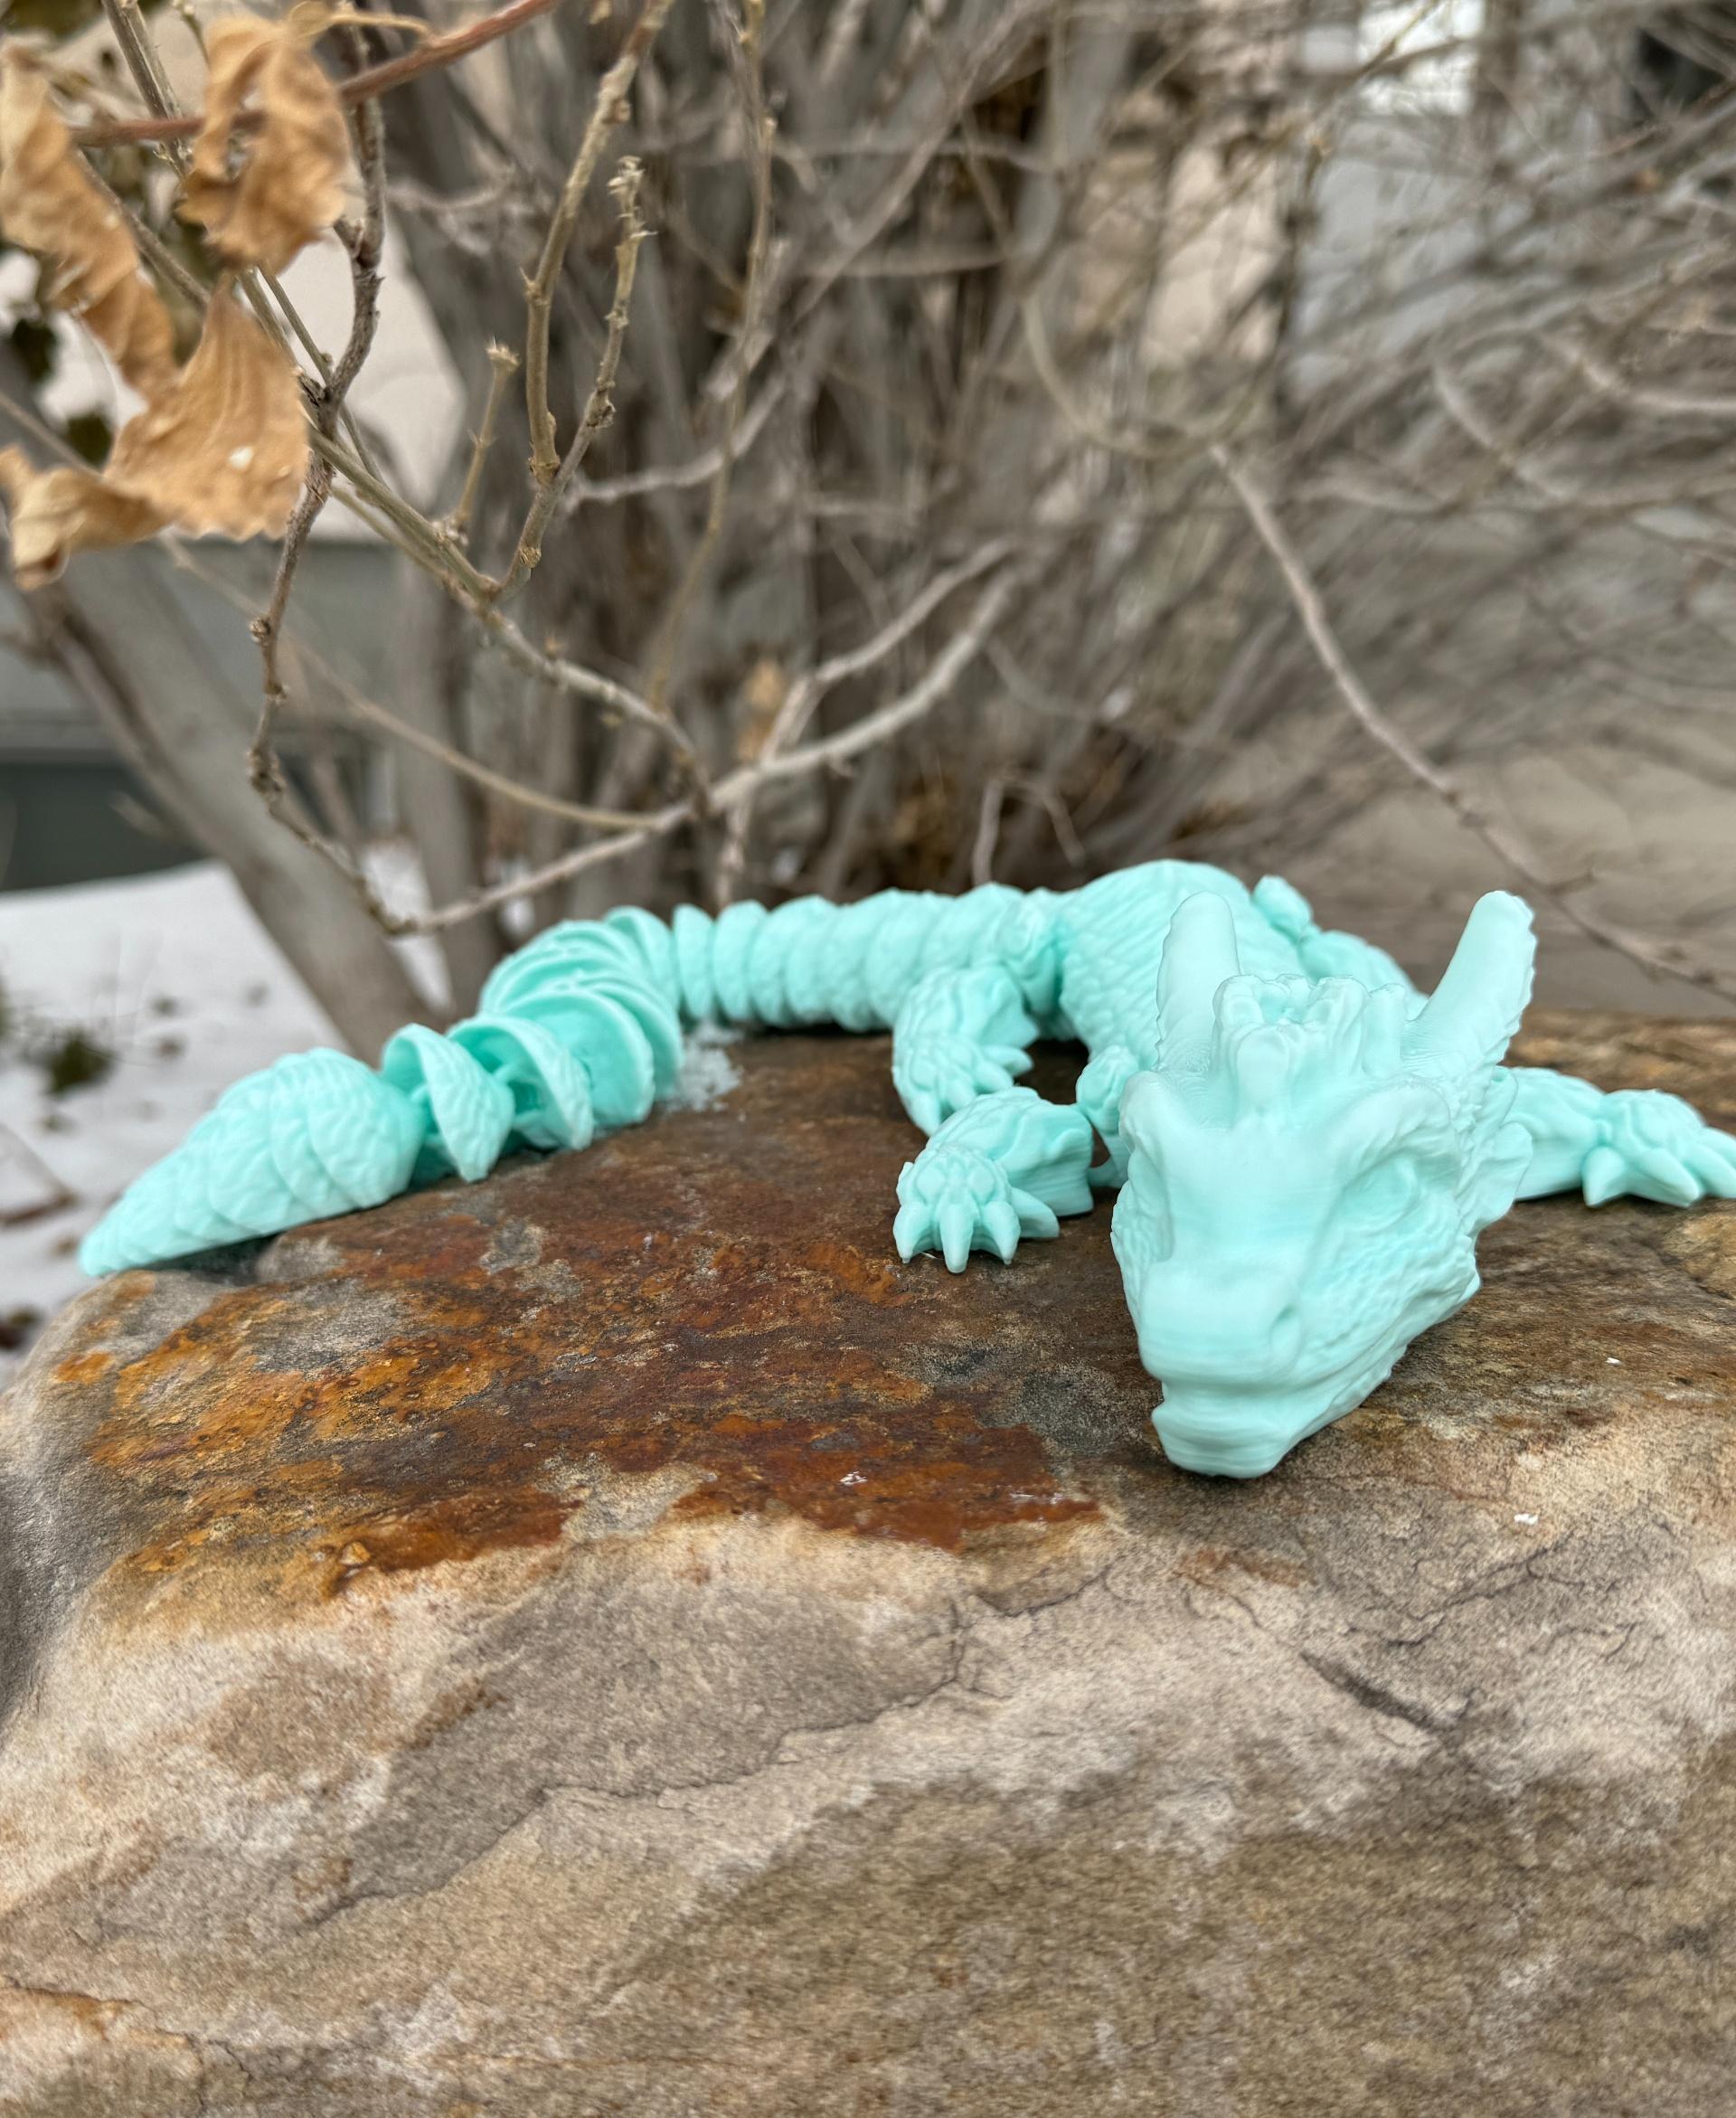 Chip, Wood Dragon - Articulated Dragon Snap-Flex Fidget (Medium Tightness Joints) - It's cold and there's snow on the ground, so Chip is wearing his Winter colors to blend in a little better!

Printed at 122% scale on the Bambu X1C with Bambu Arctic Whisper PLA Basic at 0.2mm layer height. - 3d model